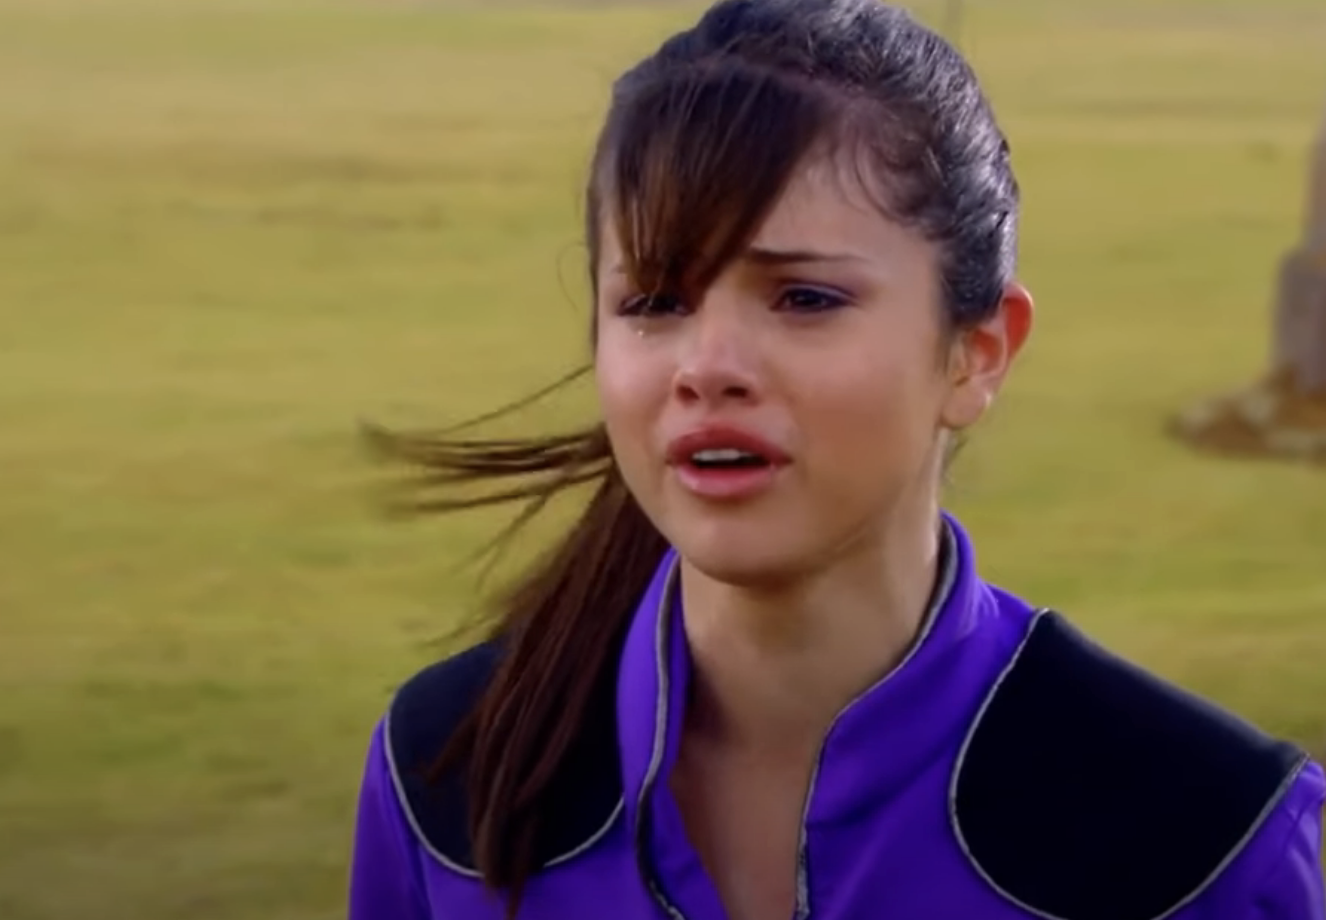 Selena Gomez looks concerned in a purple jacket outdoors